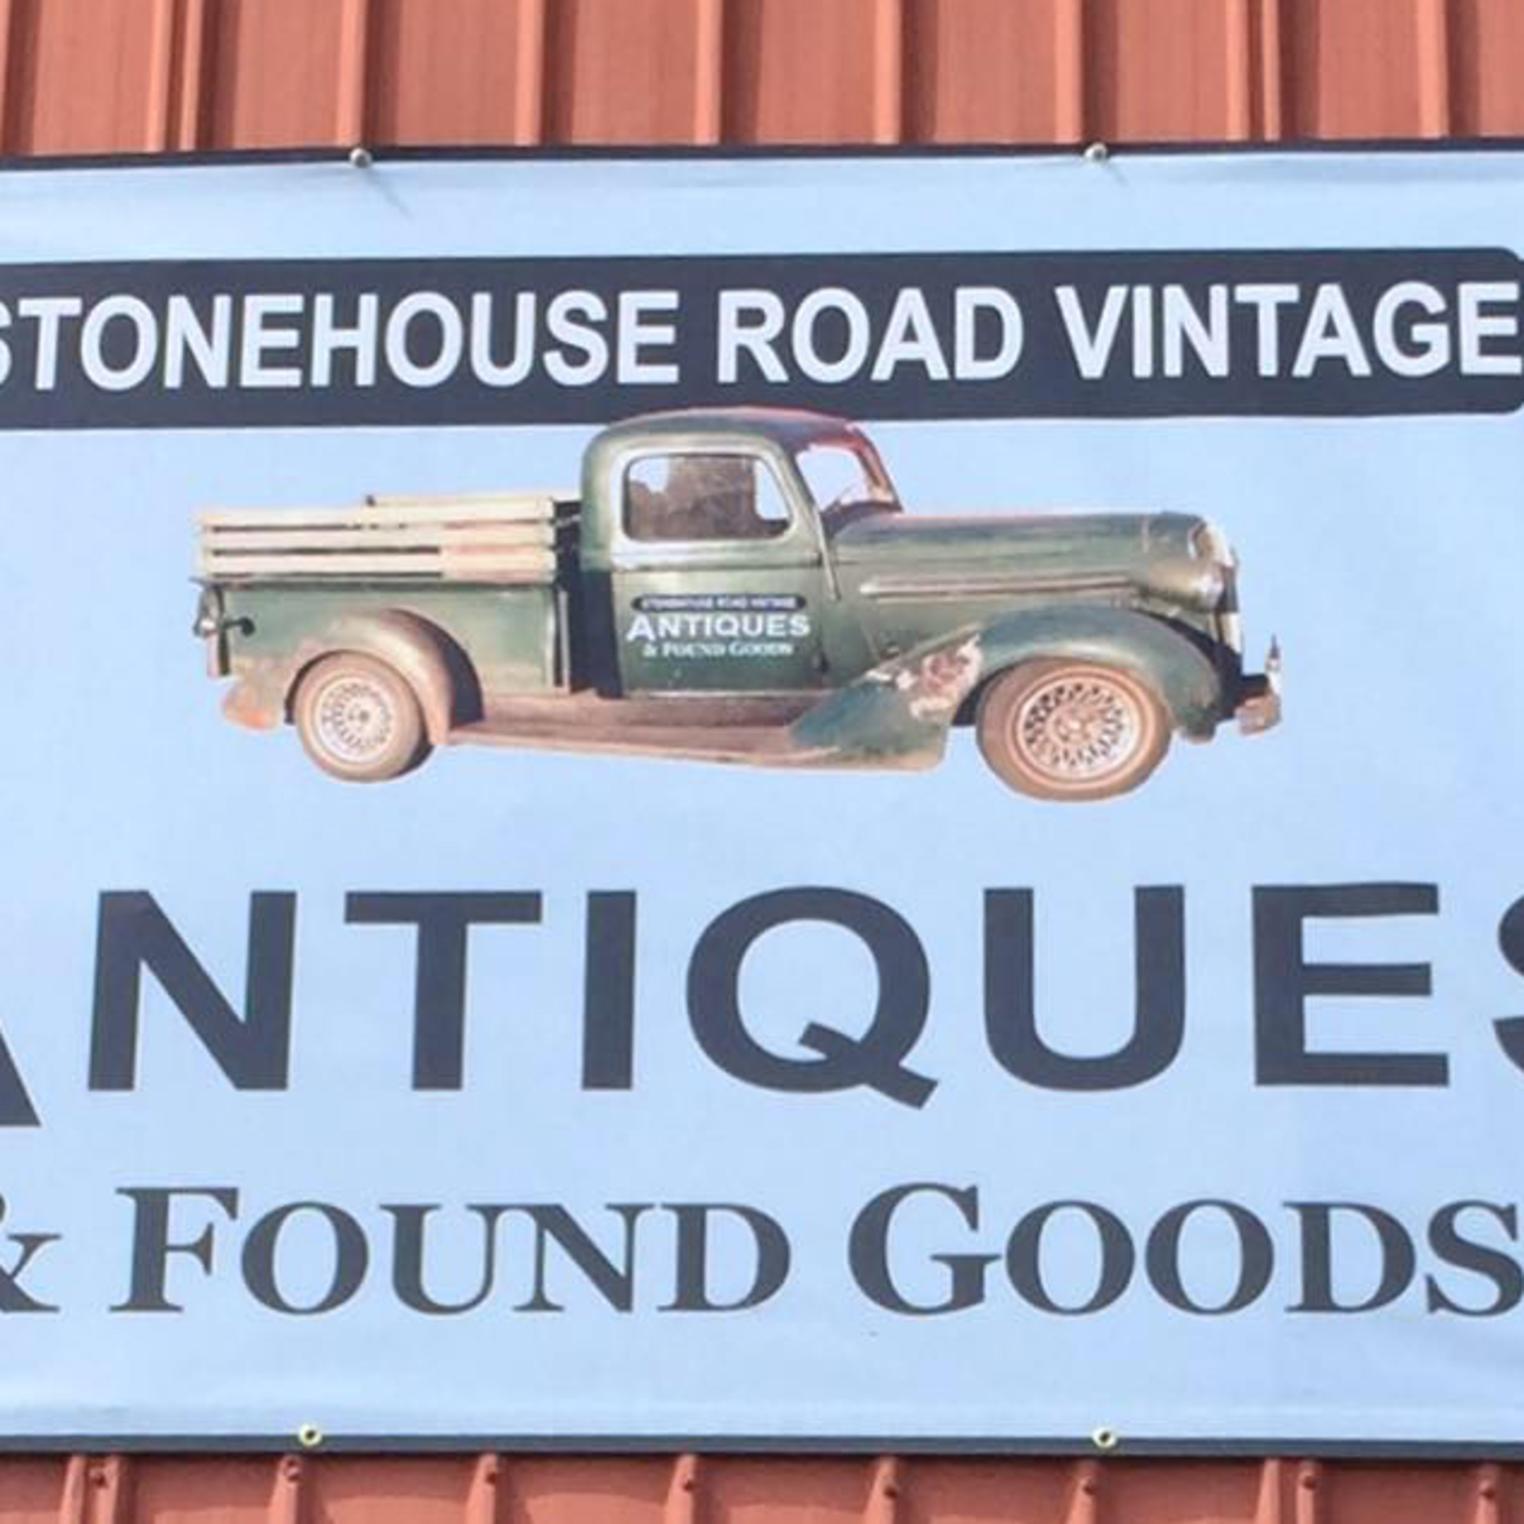 StoneHouse Road Vintage Antiques & Found Goods